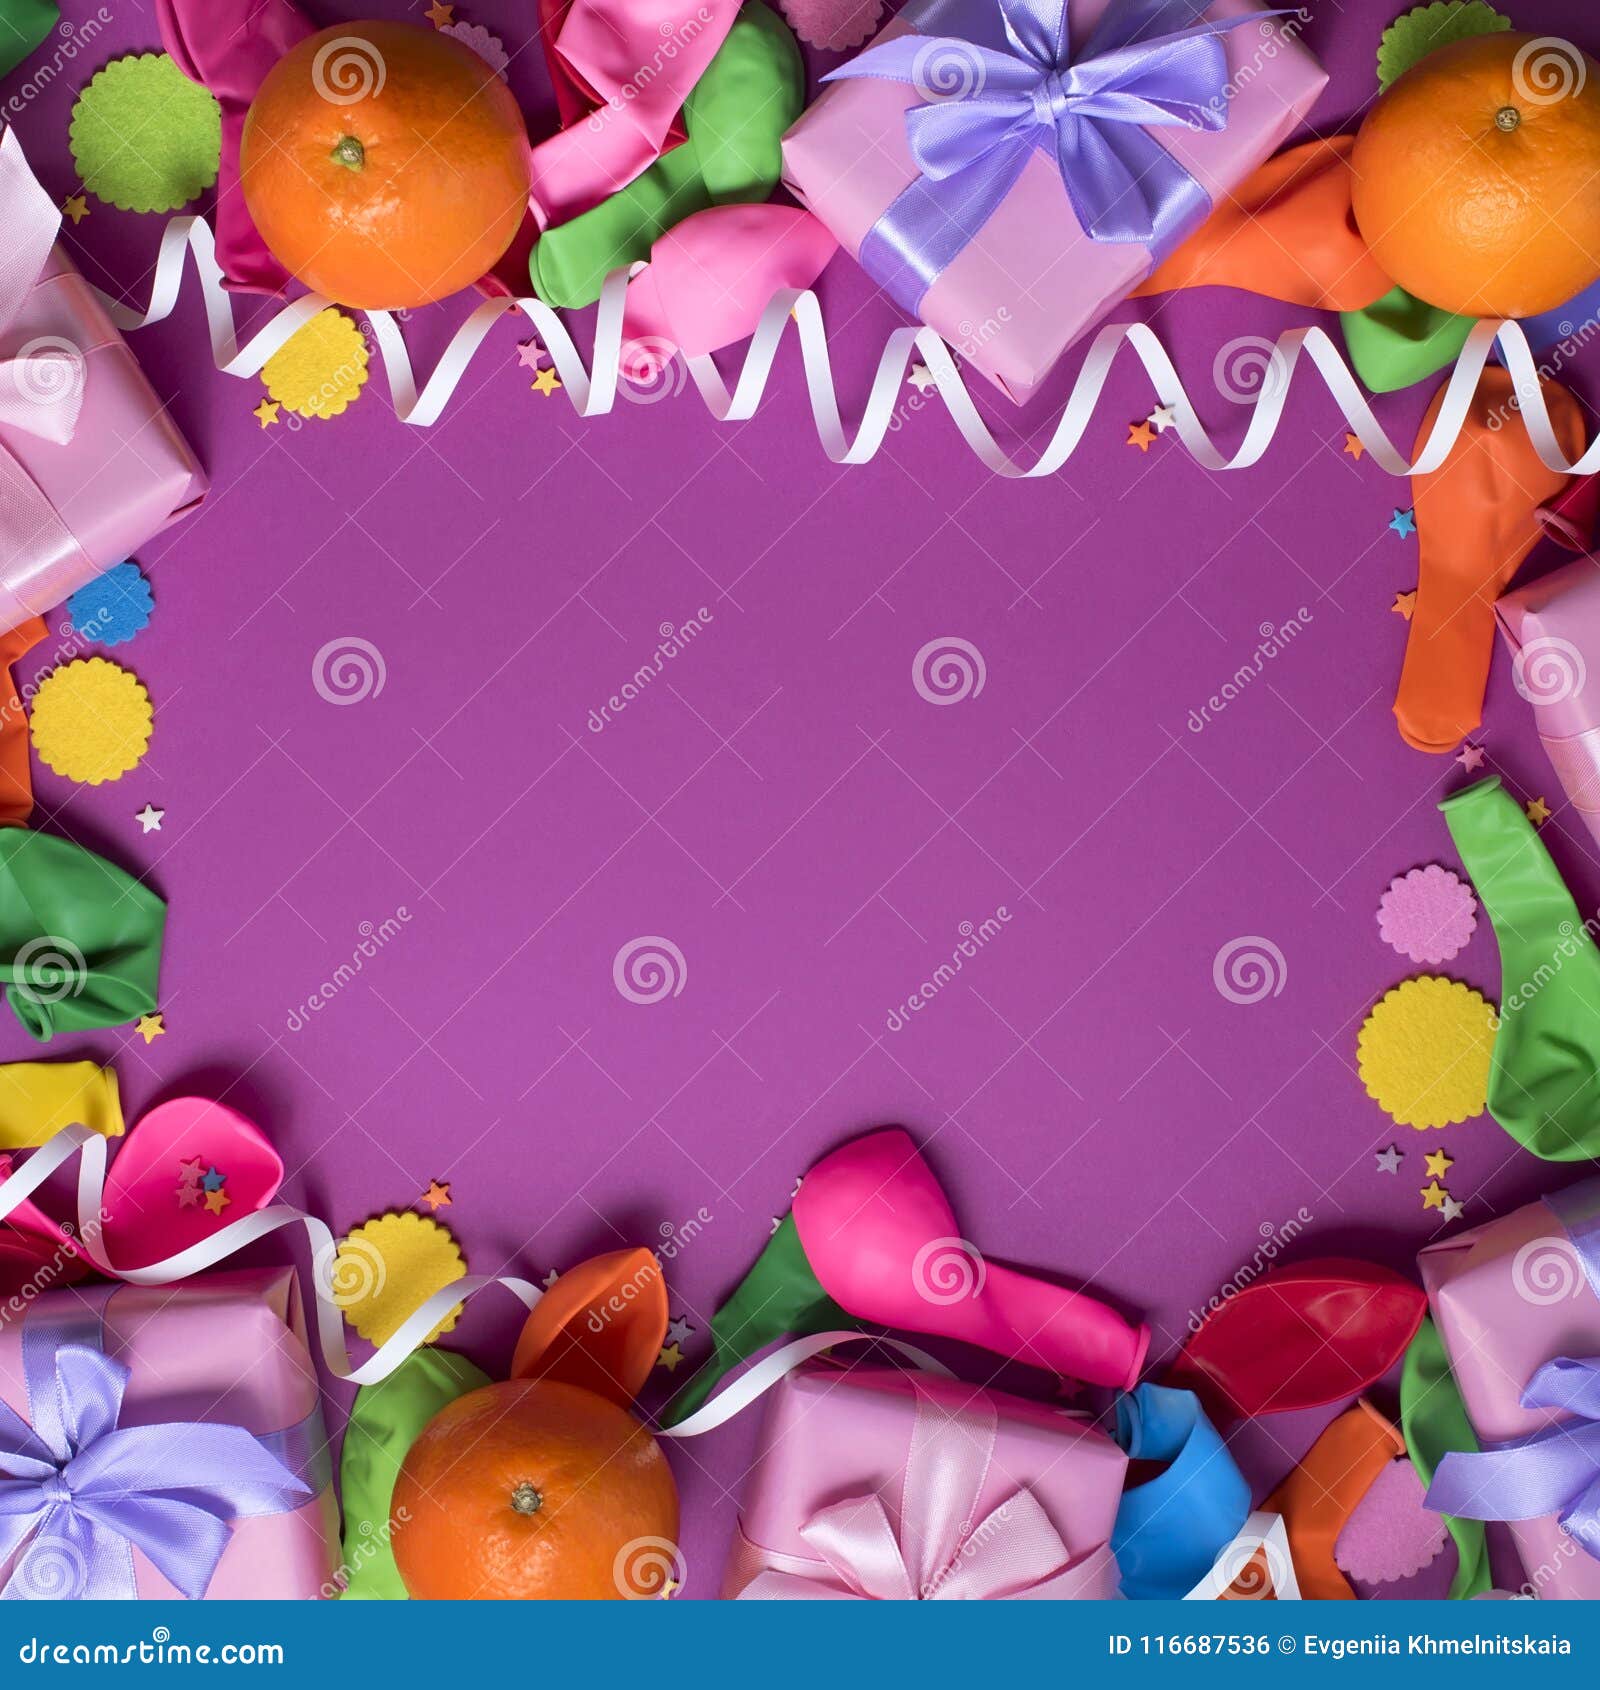 decorative composition four boxes with gifts satin ribbon bow oranges confetti serpentine birthday party.